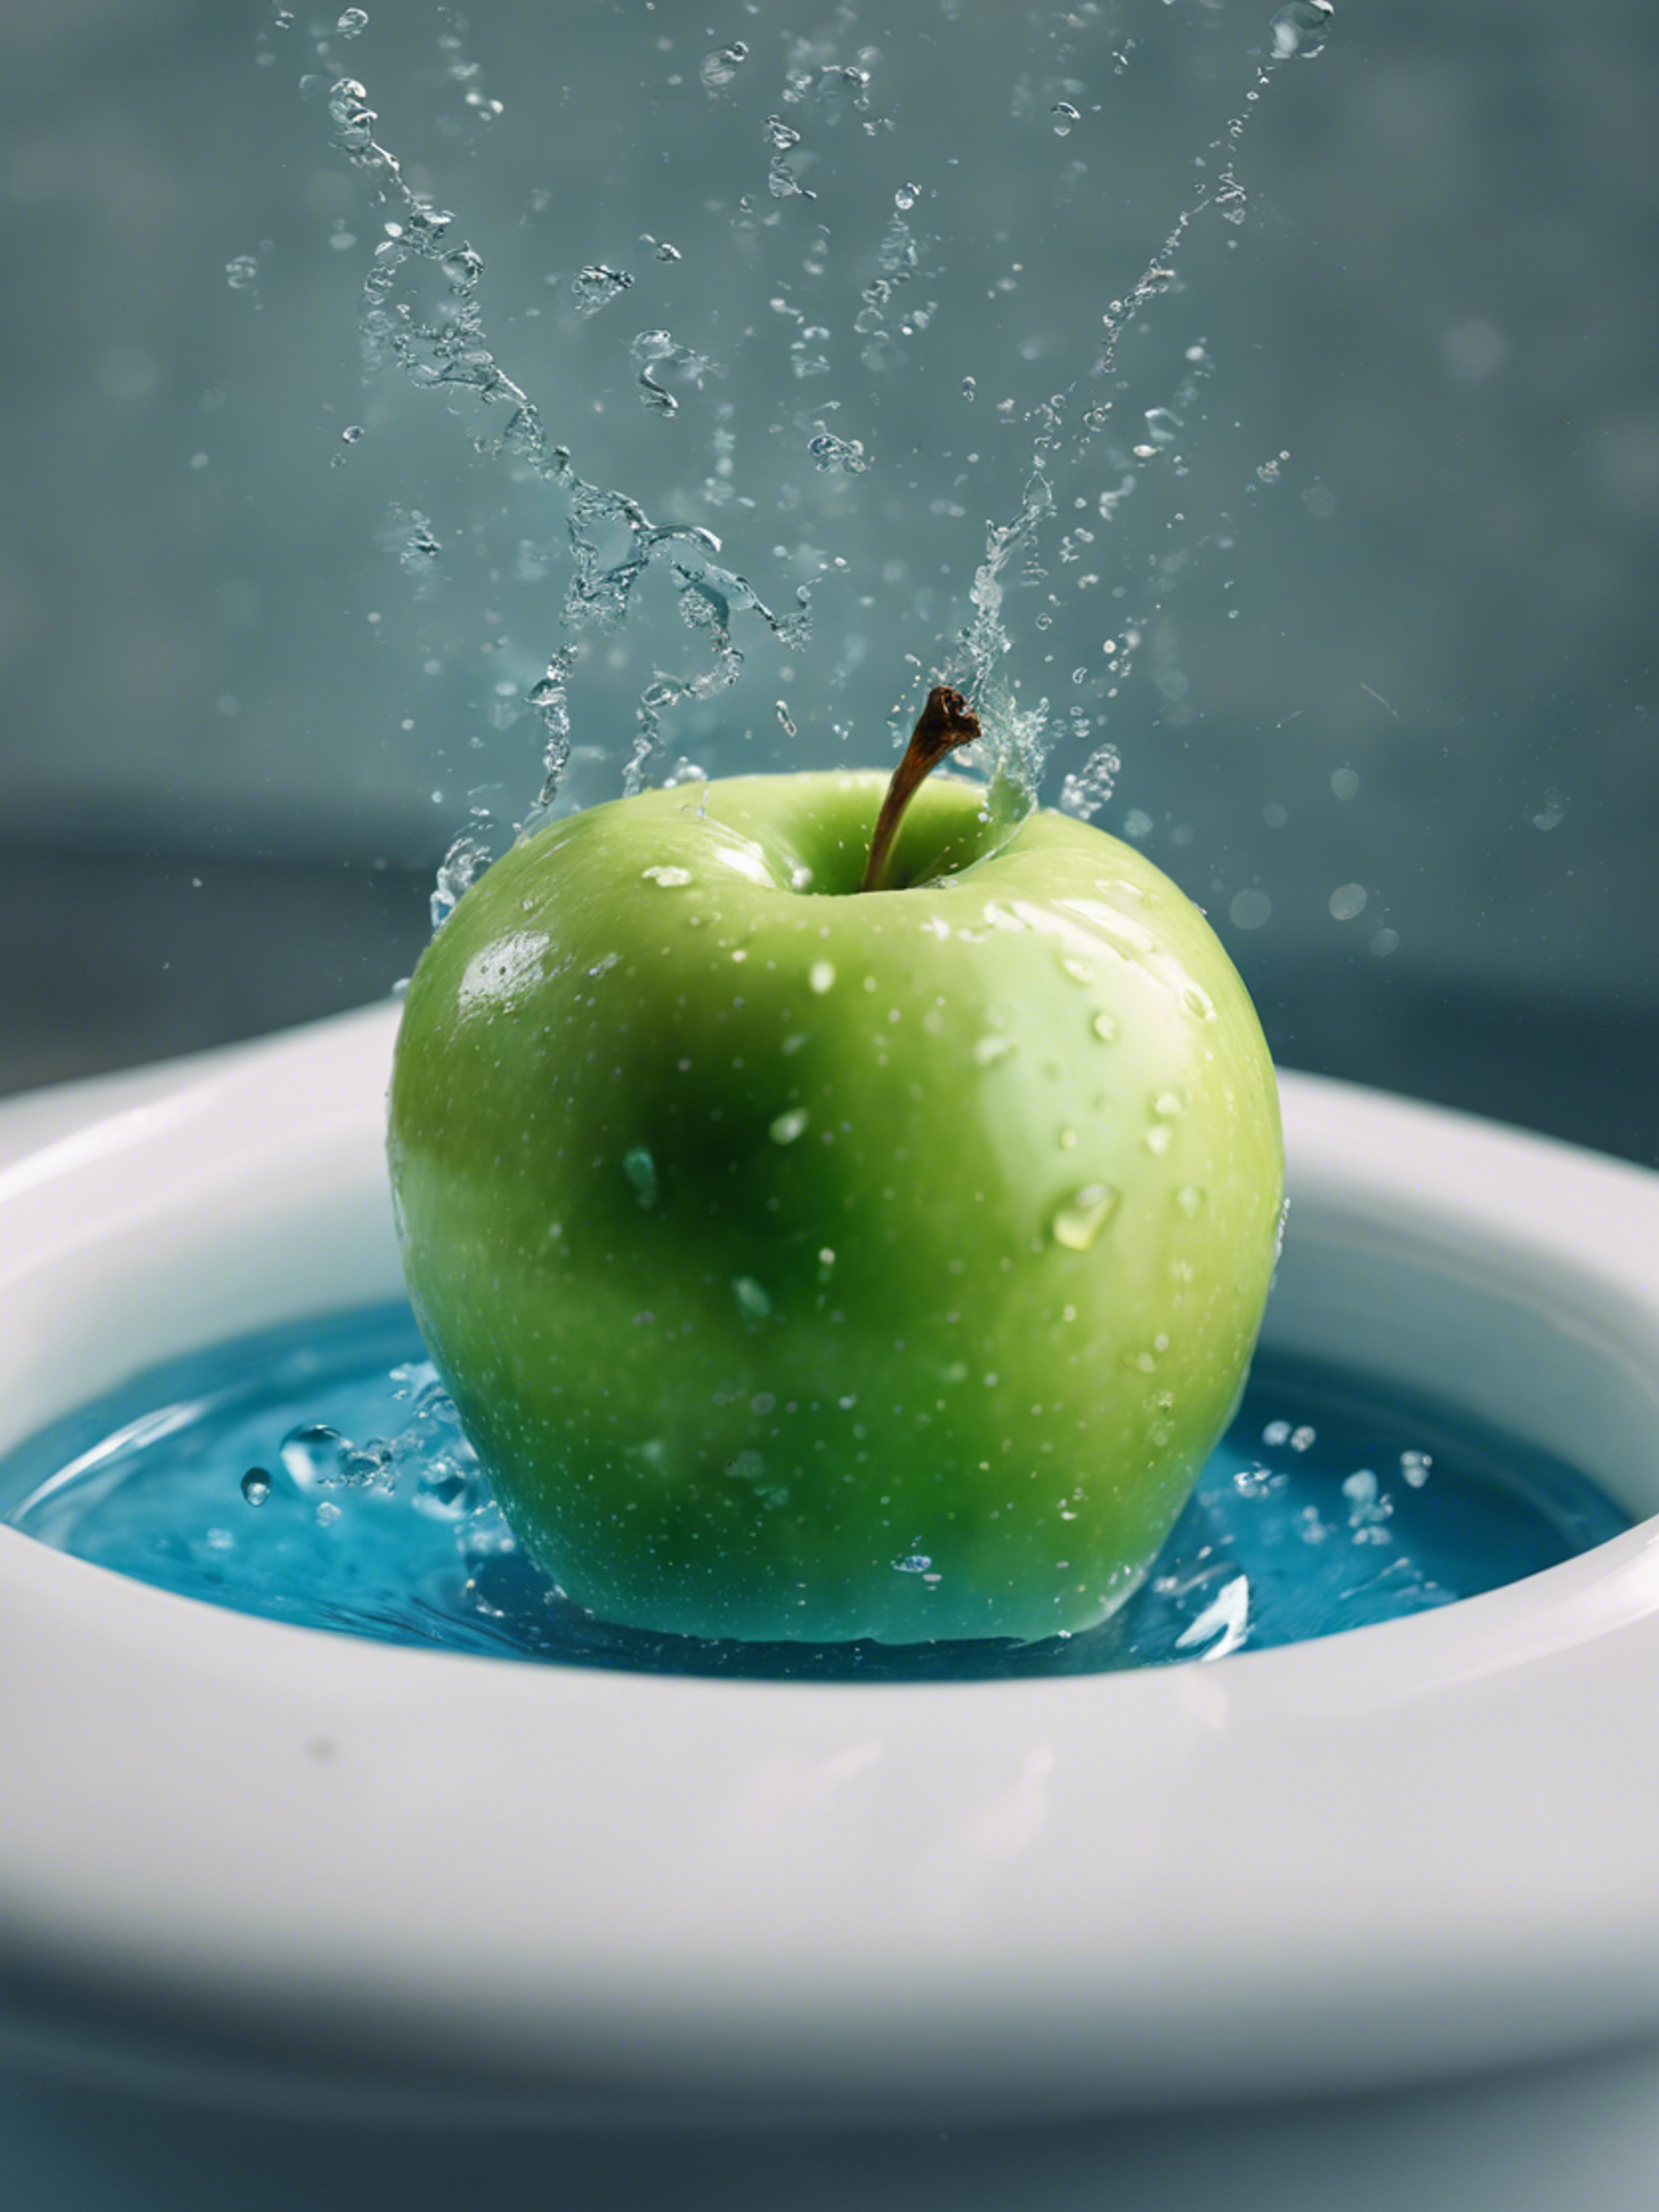 A green apple falling into a basin filled with azure blue water. Papel de parede[a9bb5407cd4a4f929343]